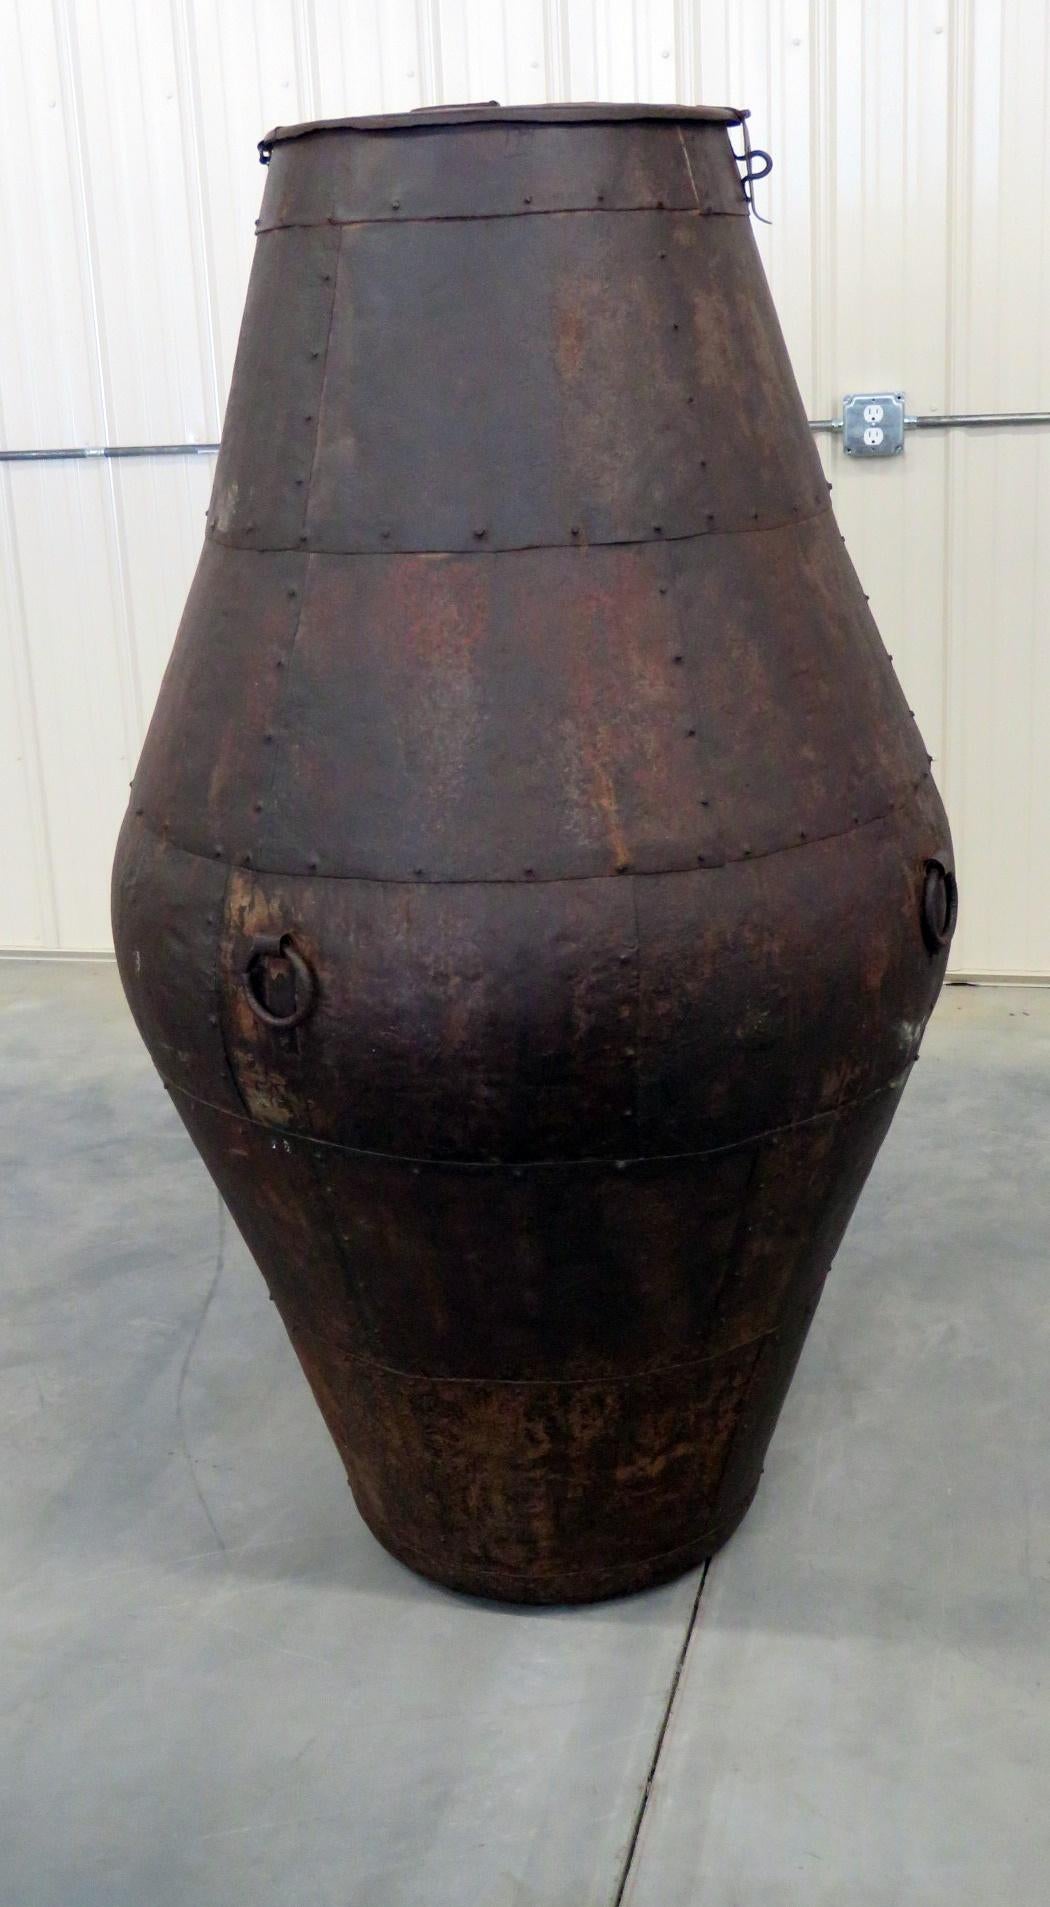 Large industrial style metal urn with 4 handles.